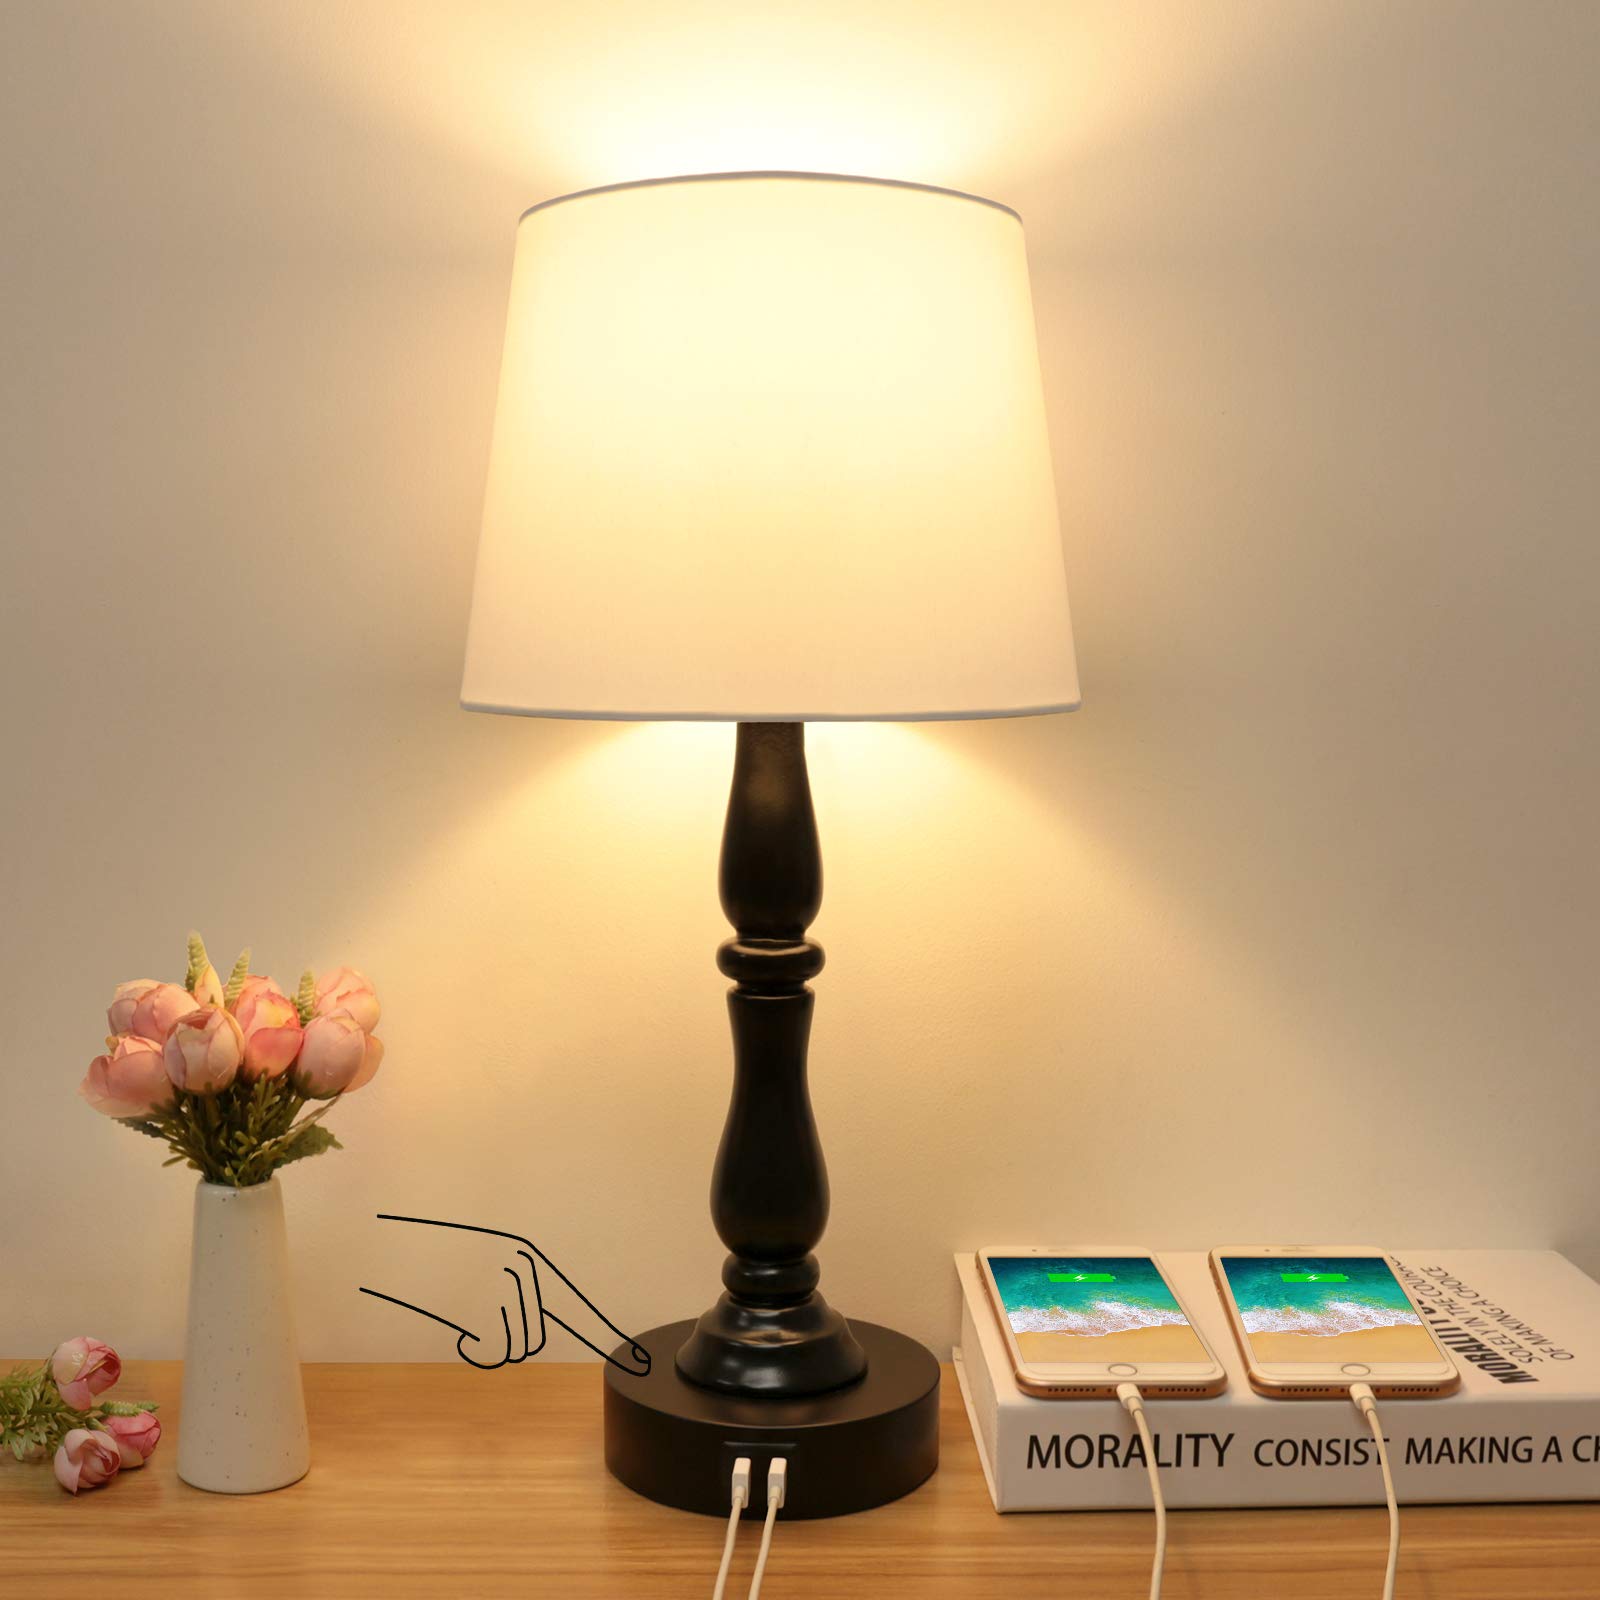 Touch Control Table Lamp with 2 USB Ports, Boncoo 3 Way Dimmable Bedside Lamp Modern Nightstand Lamp USB Table Lamp Bedside Desk Lamp with White TC...